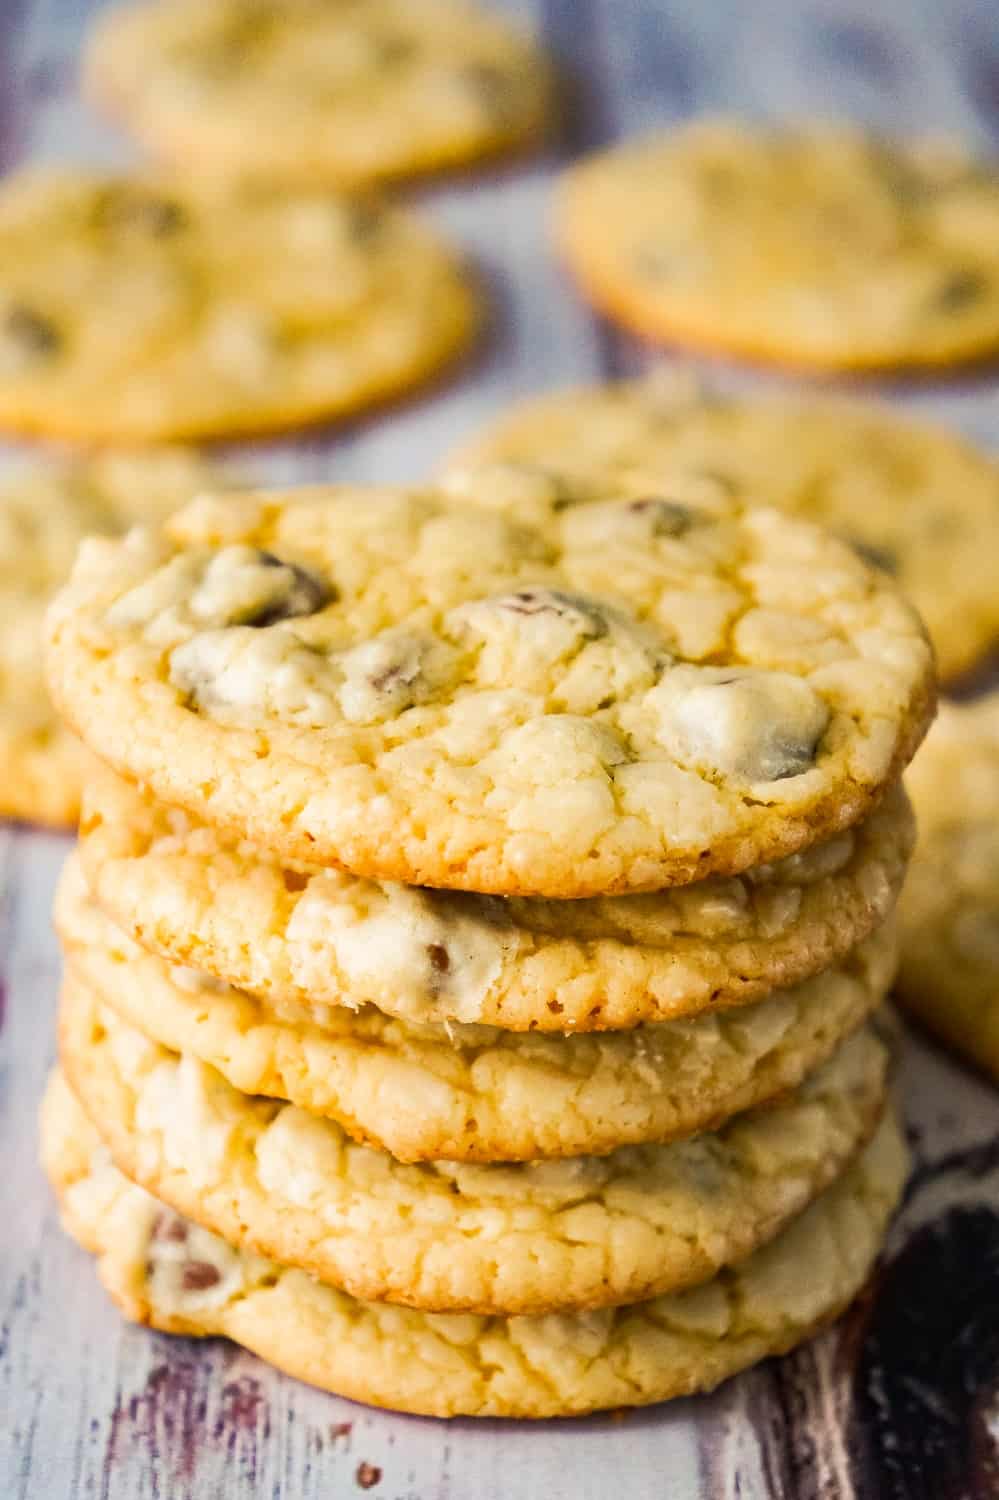 Cake Mix Chocolate Chip Cookies are a quick and easy cookie recipe. These tasty cookies are made with yellow cake mix and loaded with milk chocolate chips.